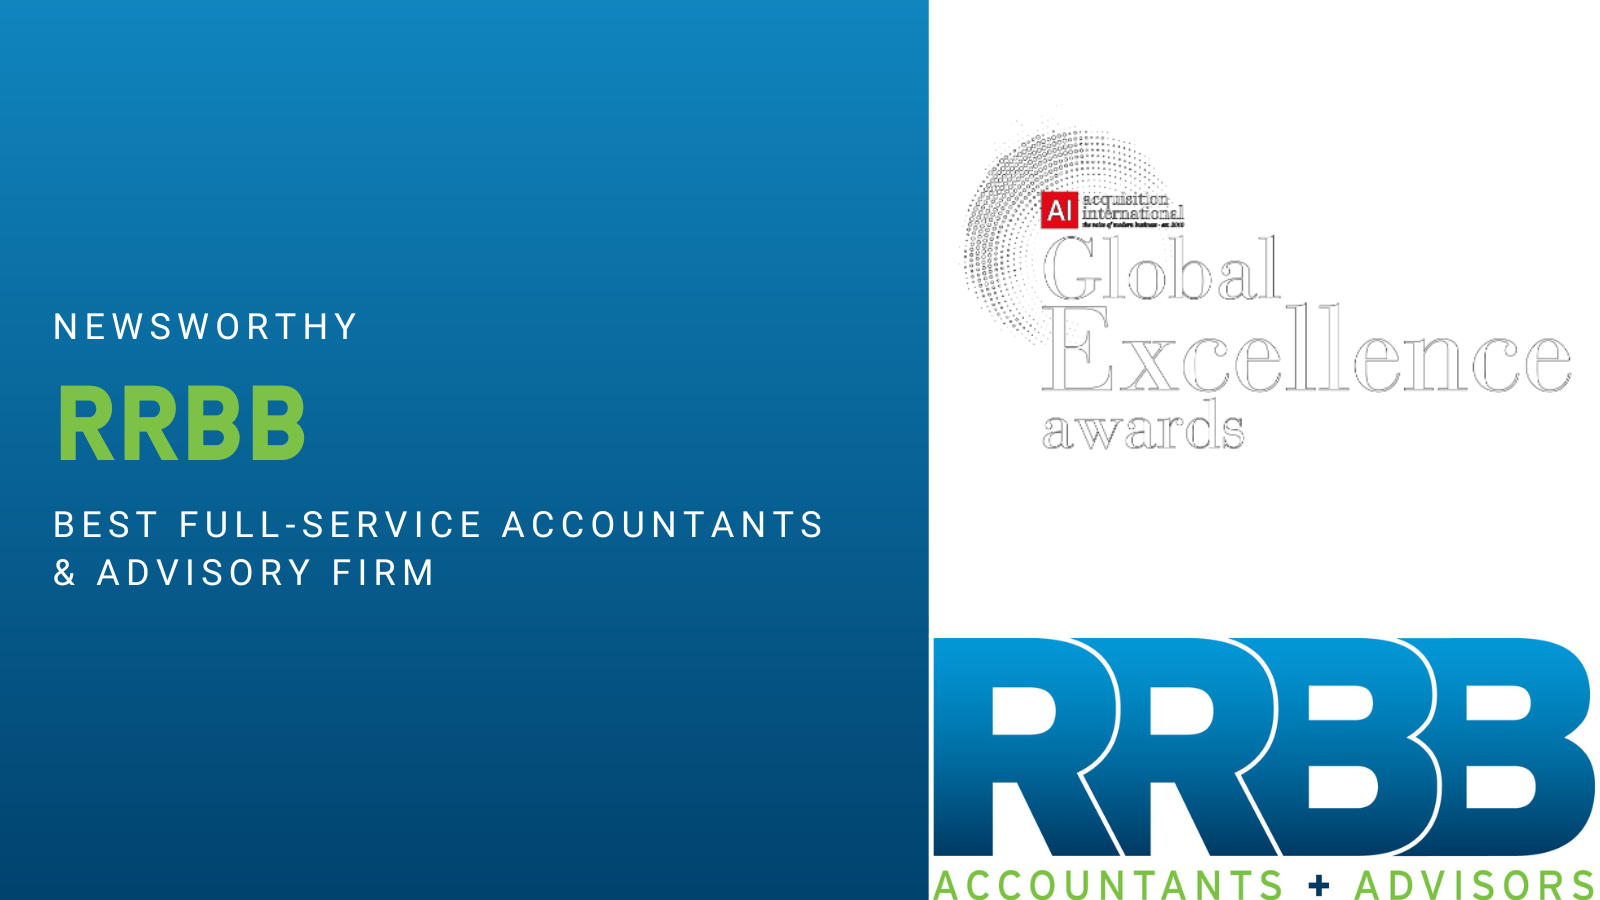 RRBB Named Best Full-Service Accountants & Advisory Firm by Acquisition International